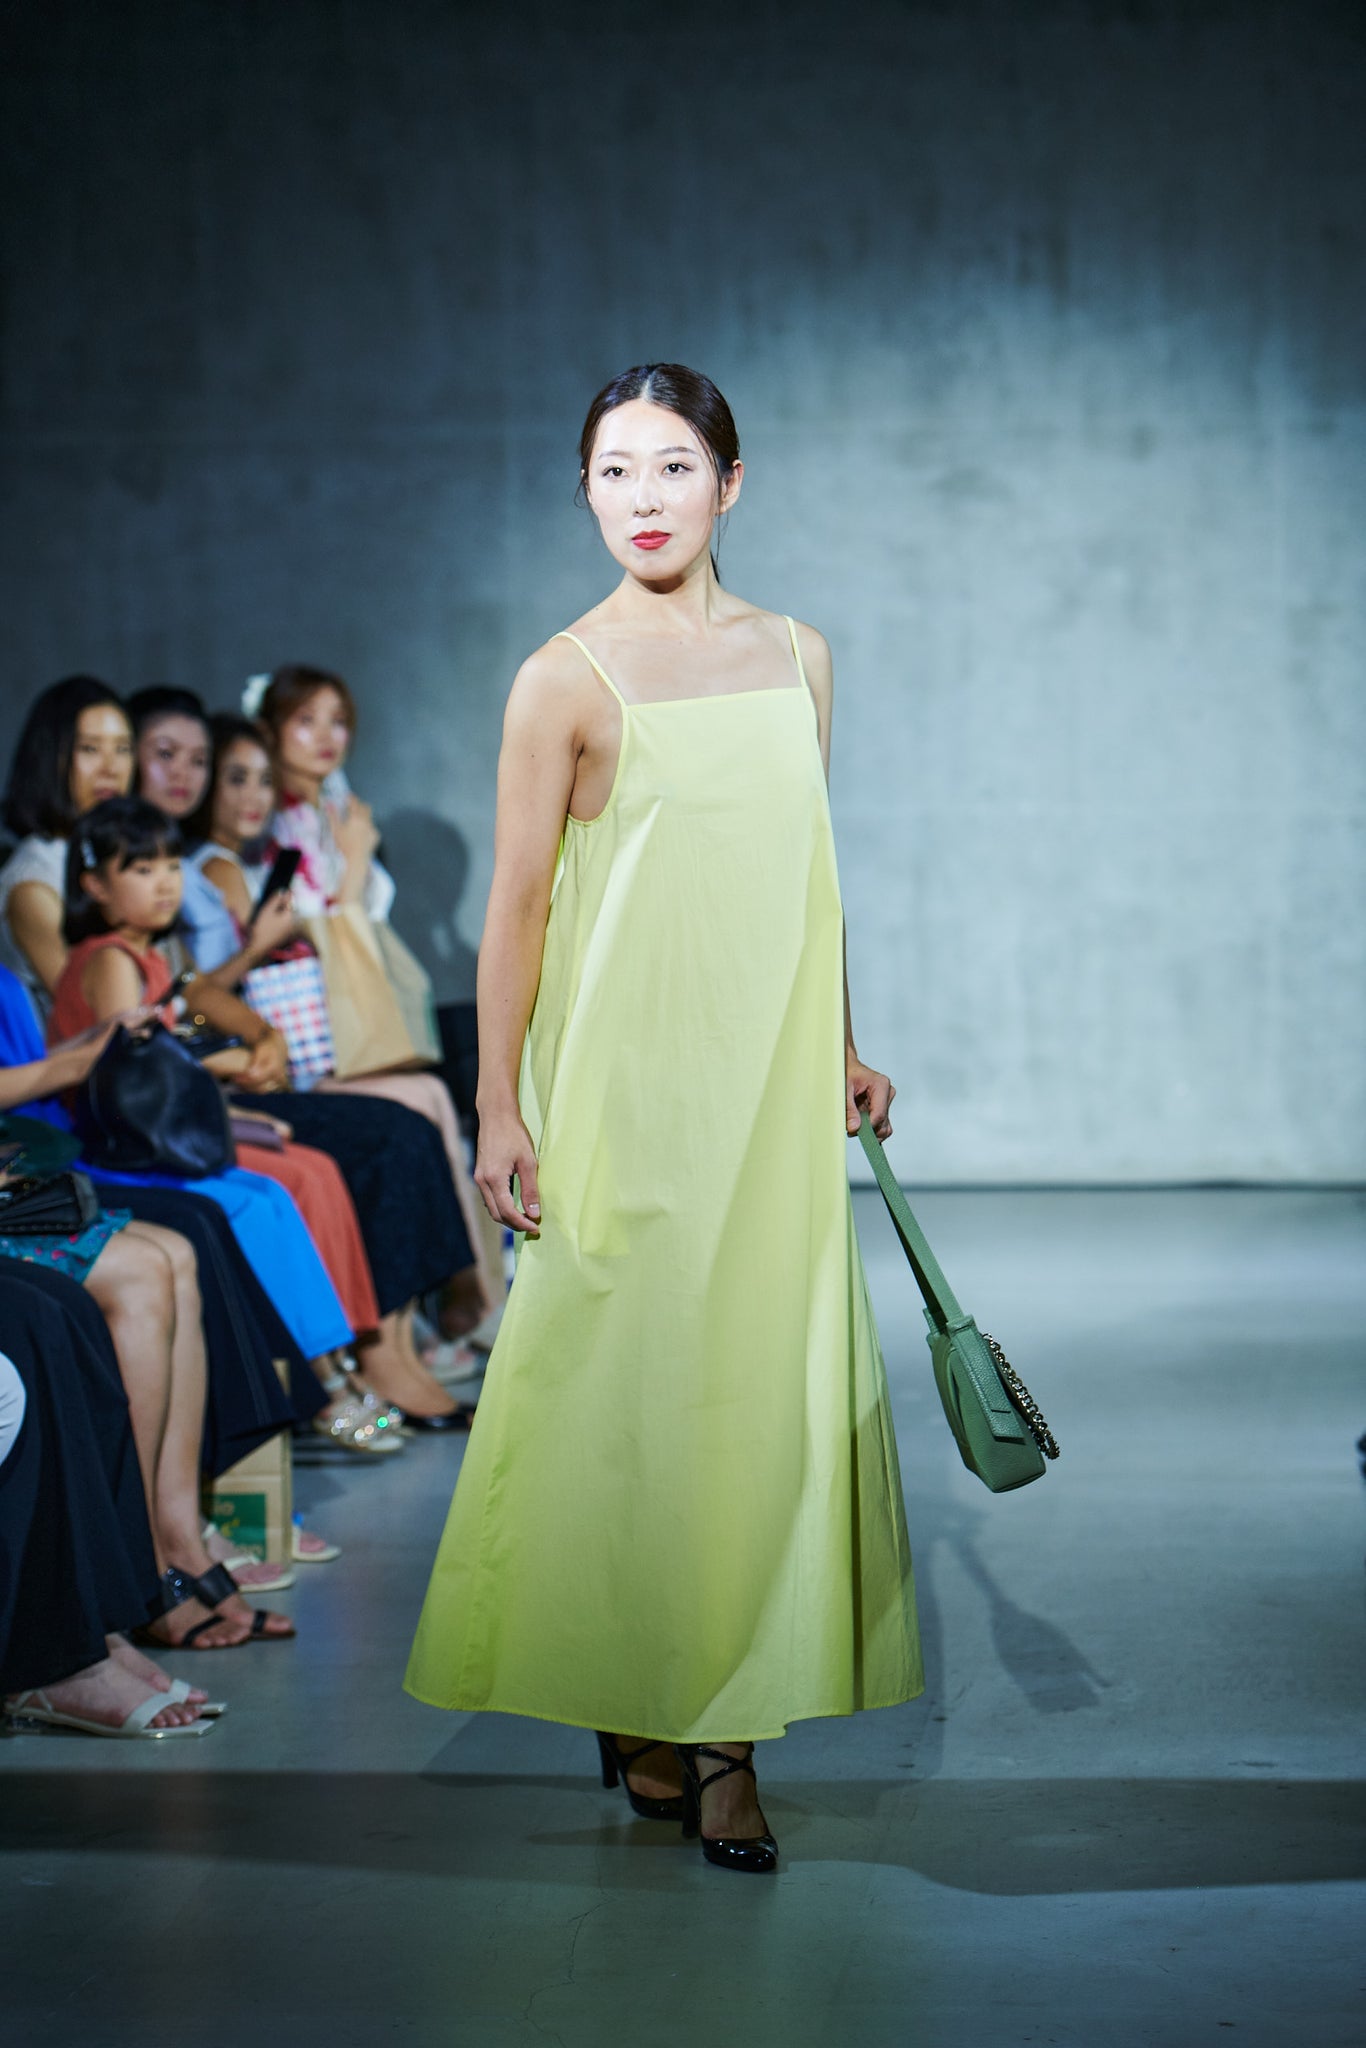 THALIE PARIS’ TOKYO ETHICAL SHOWCASE OF THE RESORT SS24 COLLECTION AT THE 2023 TOKYO ETHICAL FASHION SHOW